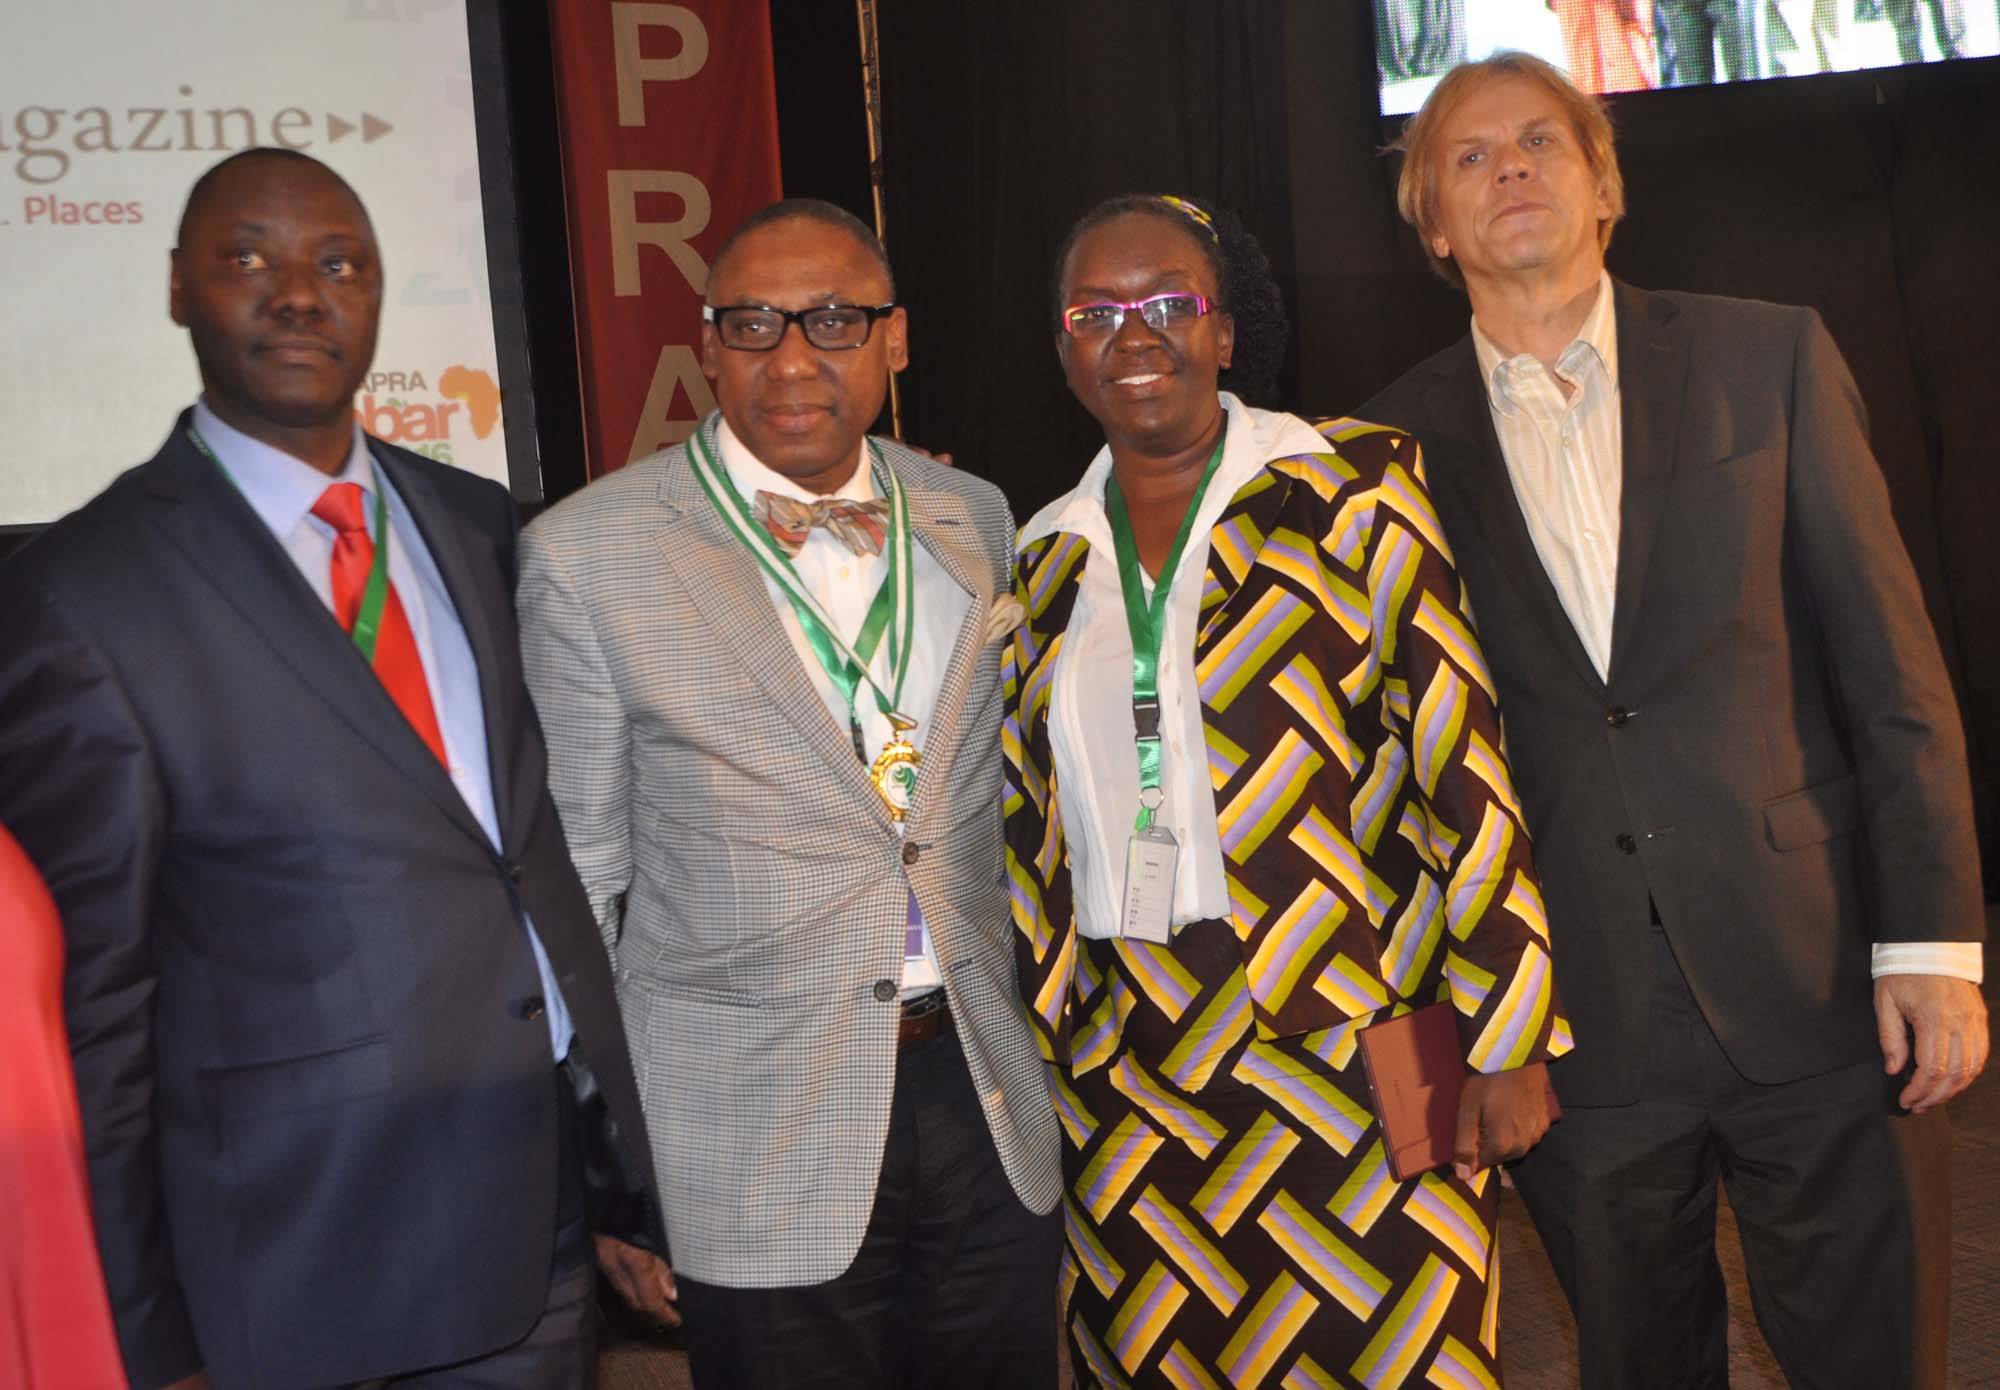 From left: Peter Mutie, outgoing President of the African Public Relations Association (APRA); Yomi Badejo-Okusanya, new APRA President; Ms Jane Gitau, new APRA Secretary General who is also President,  Public Relations Society of Kenya; and Bart de Vries, President of the International Public relations Association (IPRA) after the inauguration of the new APRA Executive at the just concluded APRA Calabar 2016 Conference